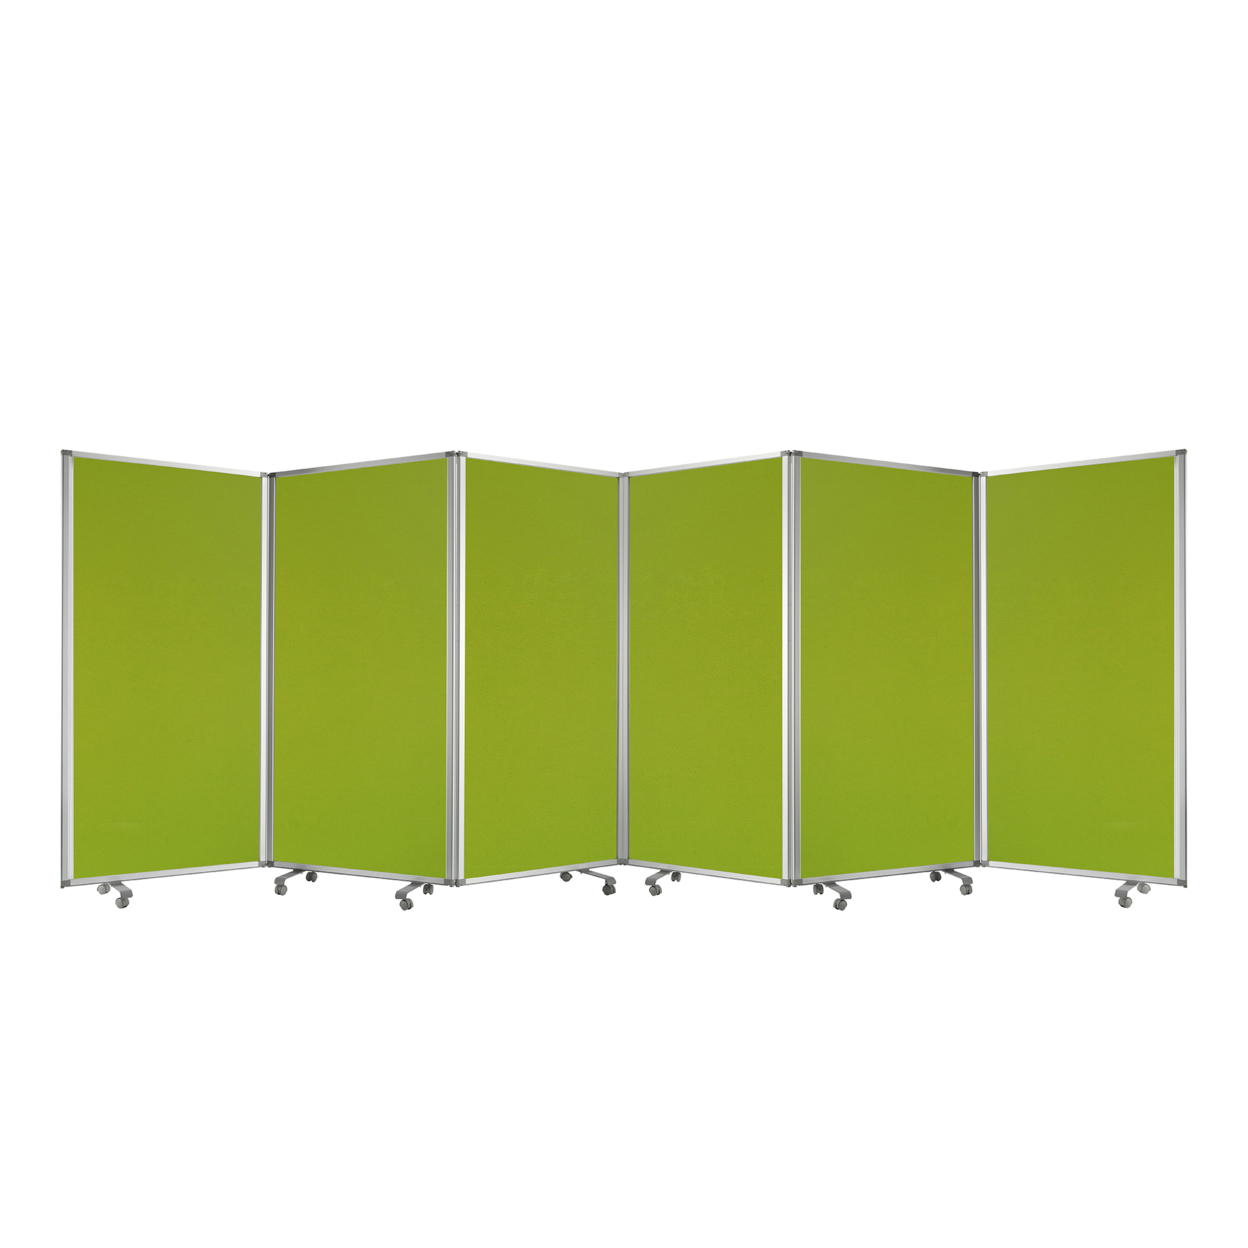 Accordion Style 6 Panel Fabric Upholstered Metal Screen With Casters, Green- Saltoro Sherpi